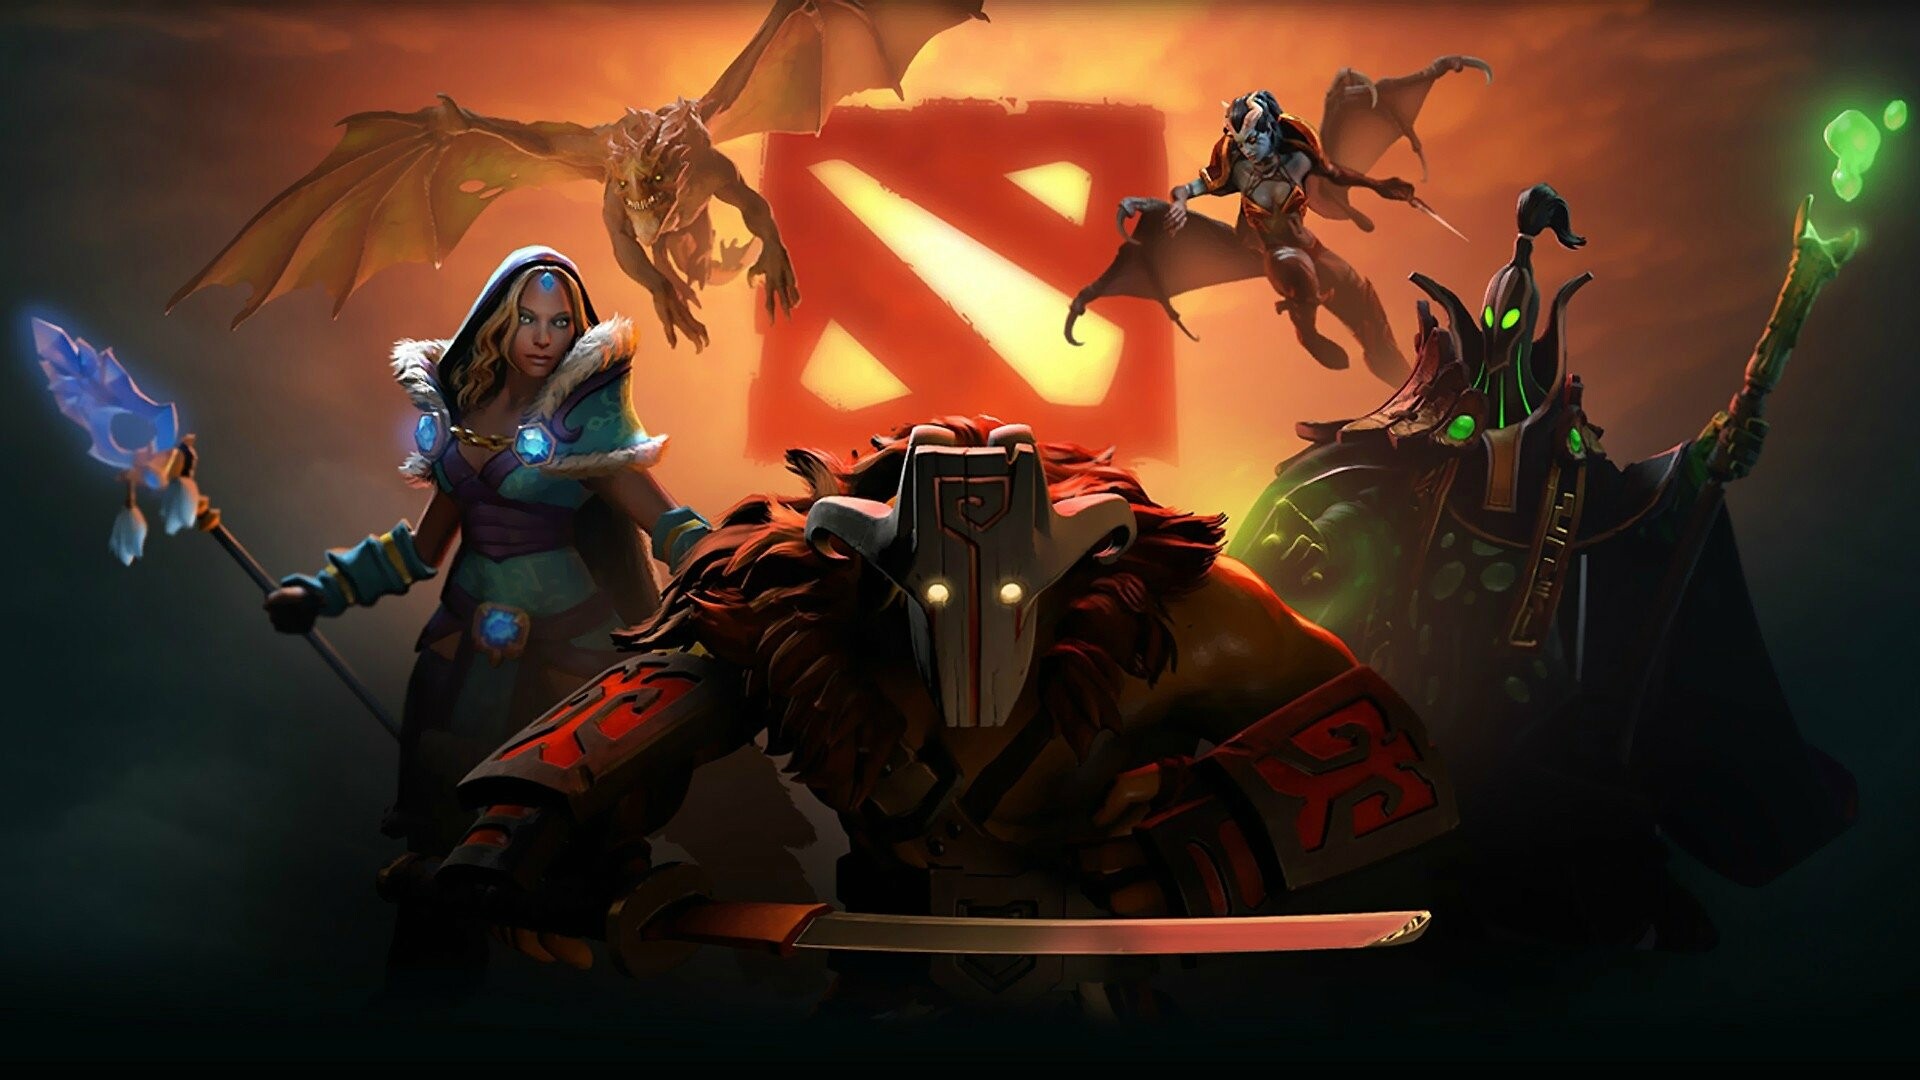 Dota 2: The game won IGN's People's Choice Award in 2011. 1920x1080 Full HD Background.